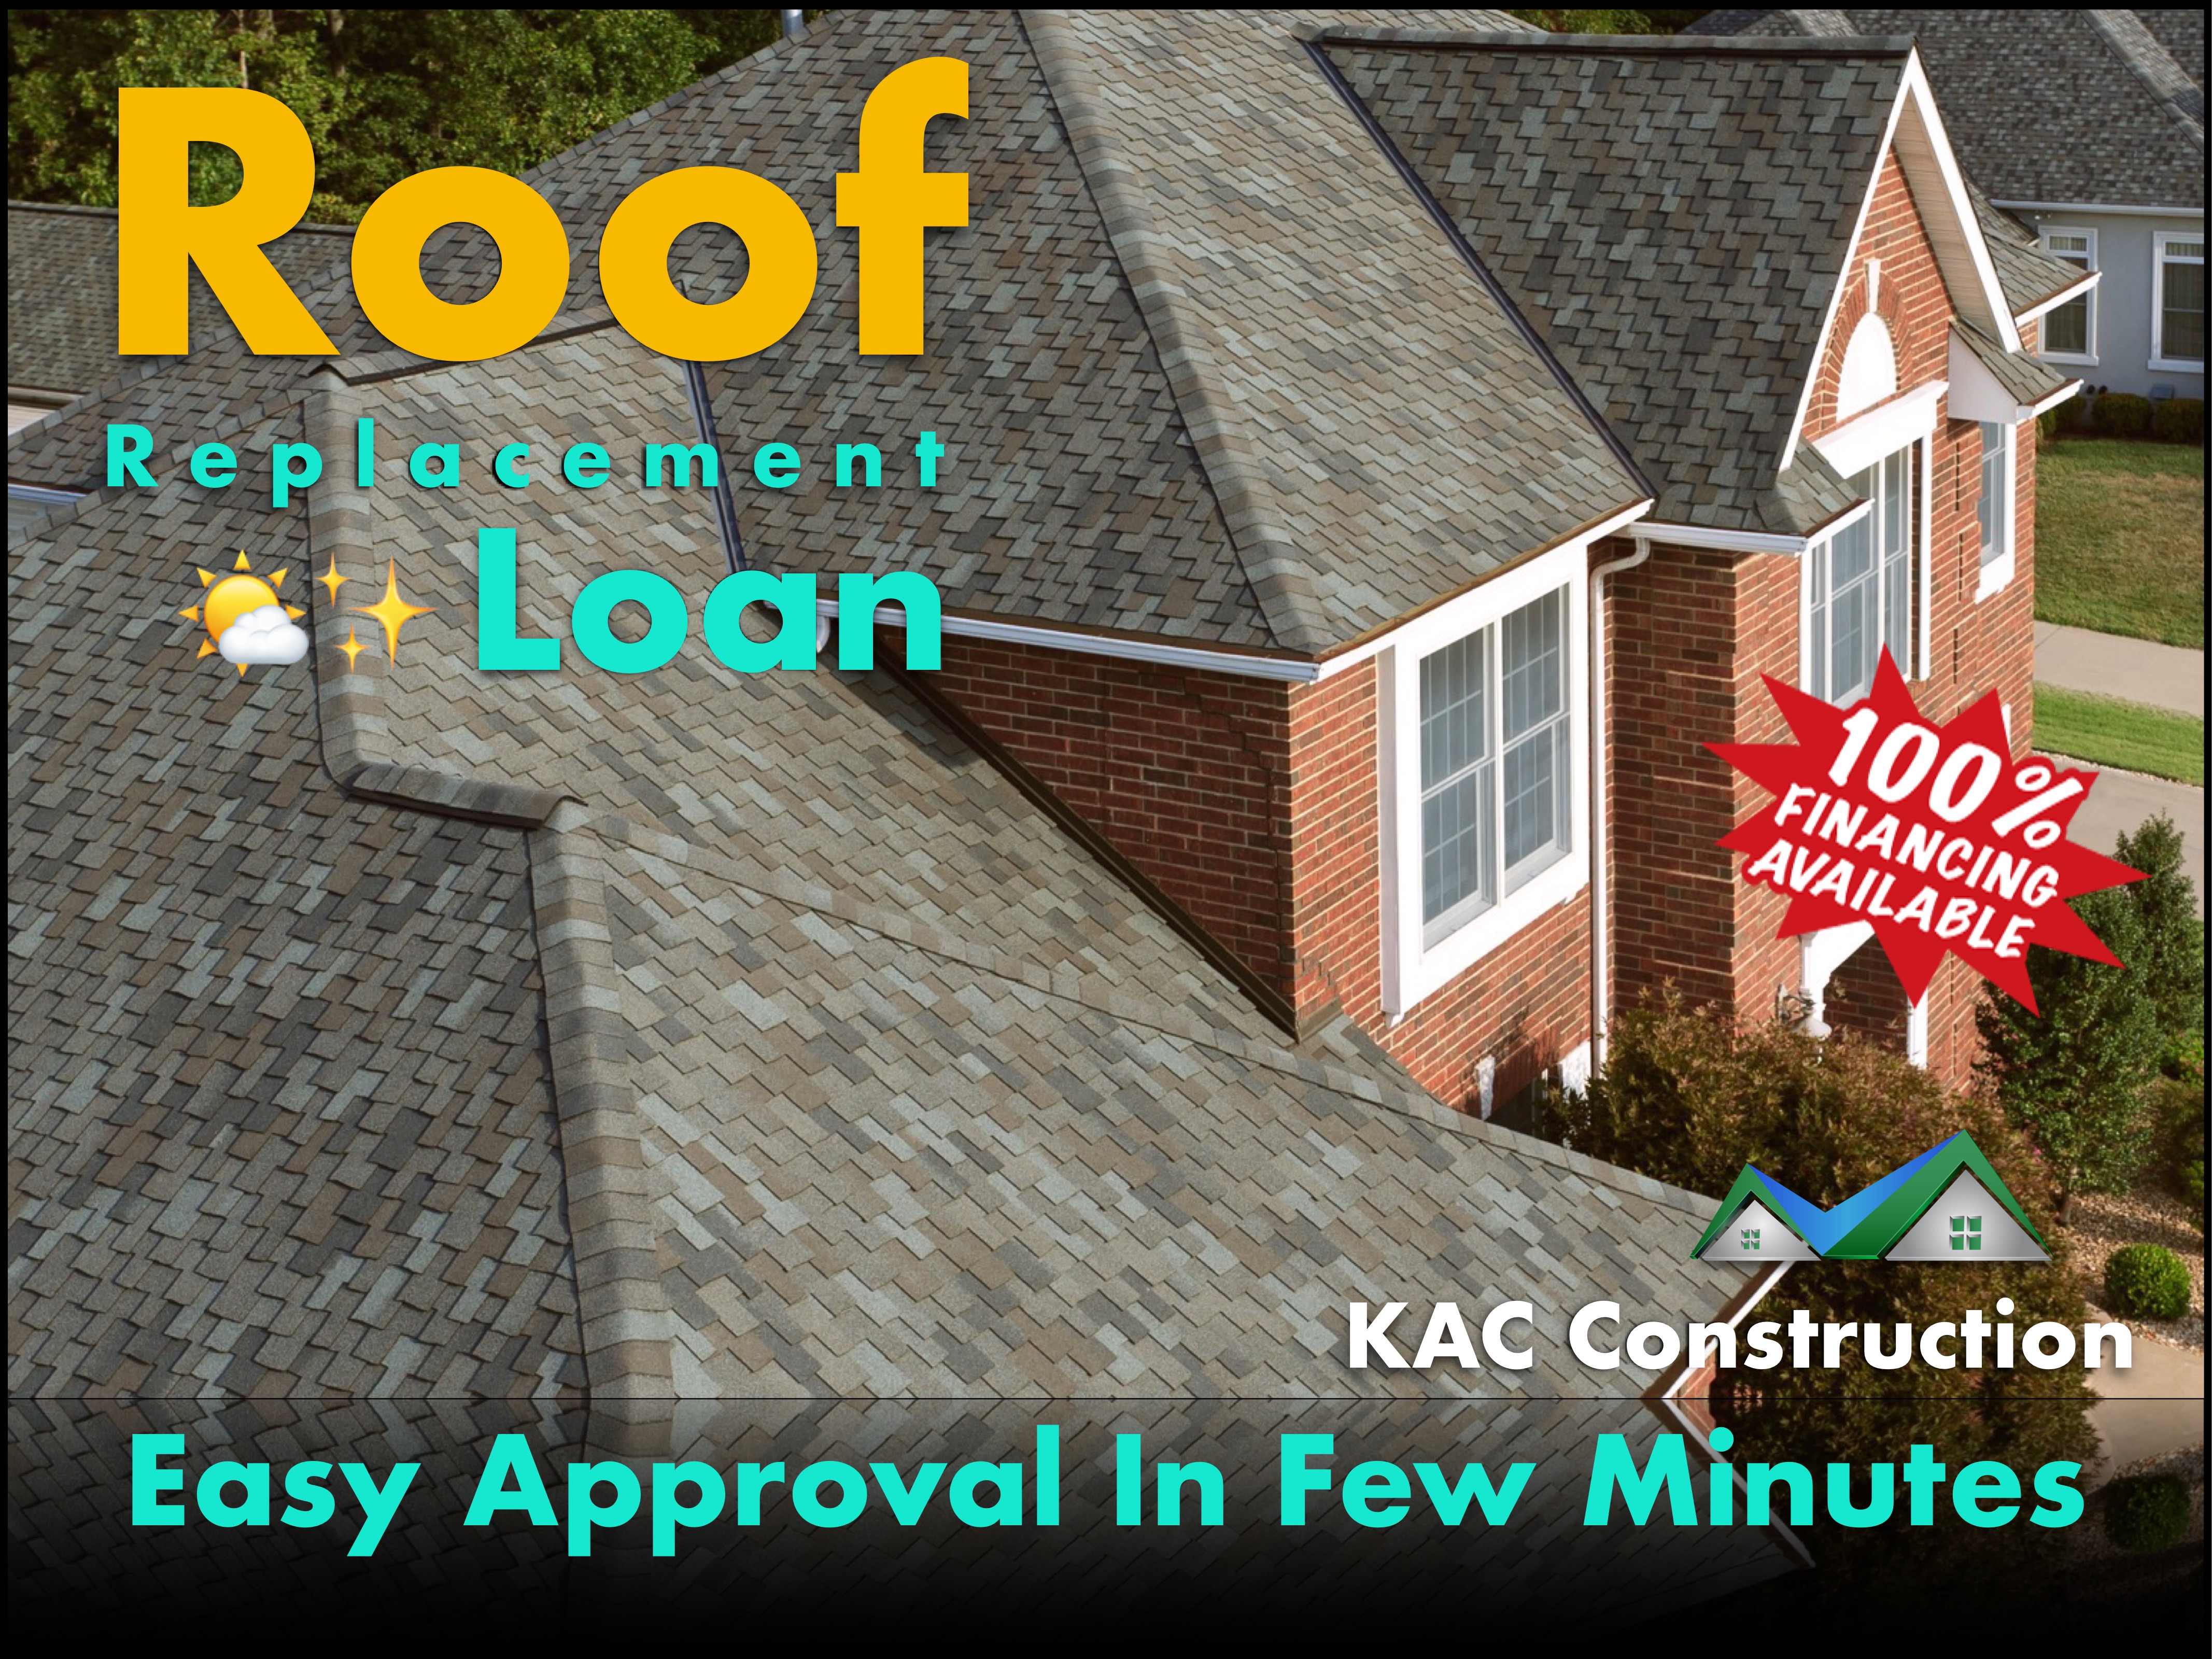 Roo replacement, roof replacement loan, roof replacement loan ri, roof Loan ri, roof financing ri, roof replacement financing ri, easy approval loan, easy approval loan ri, easy approvalmroof Loan, easy approvalmroofing Loan,